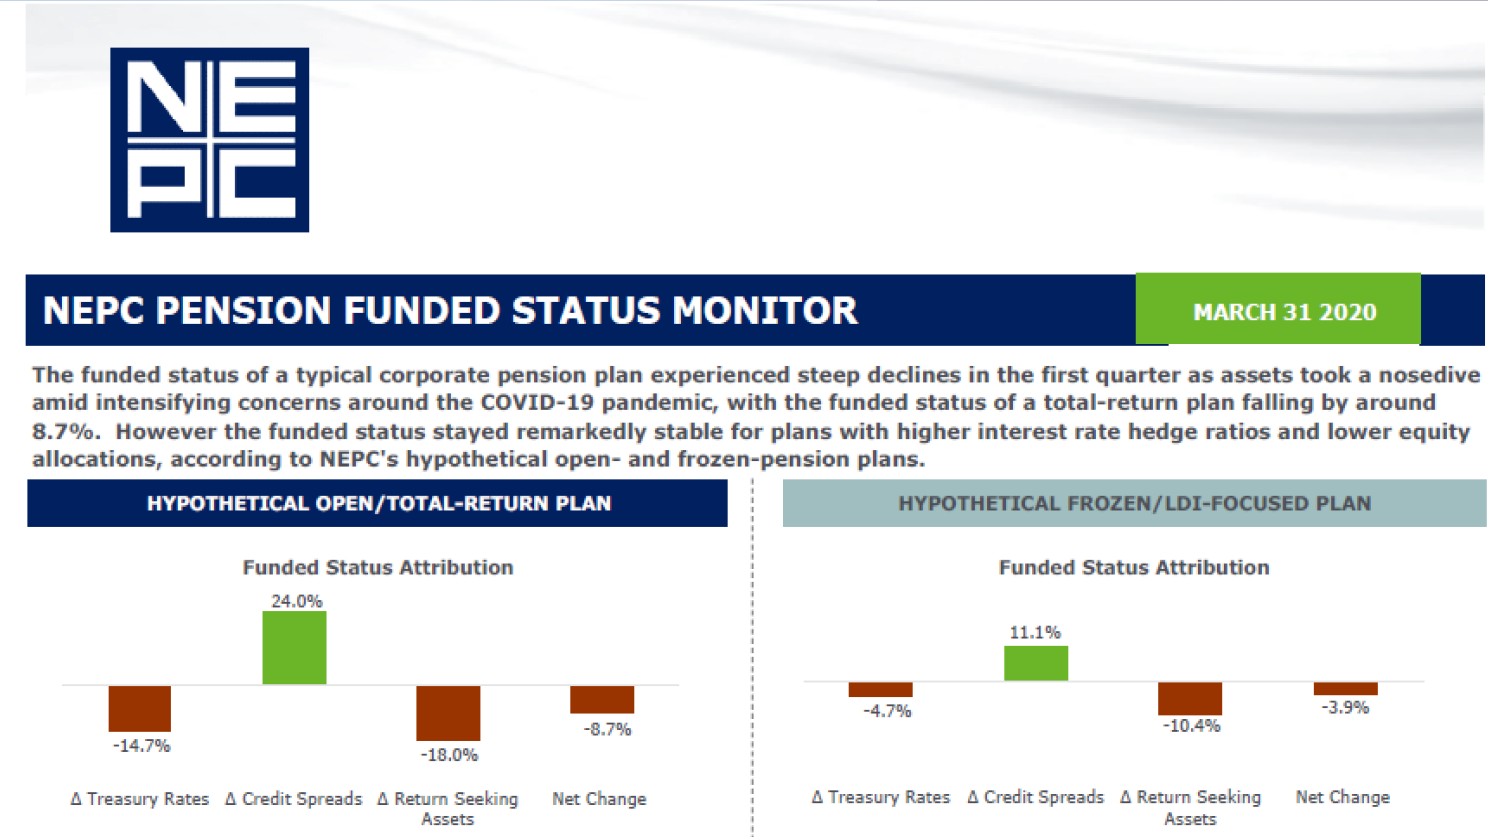 March 2020 NEPC pension funded status monitor report.